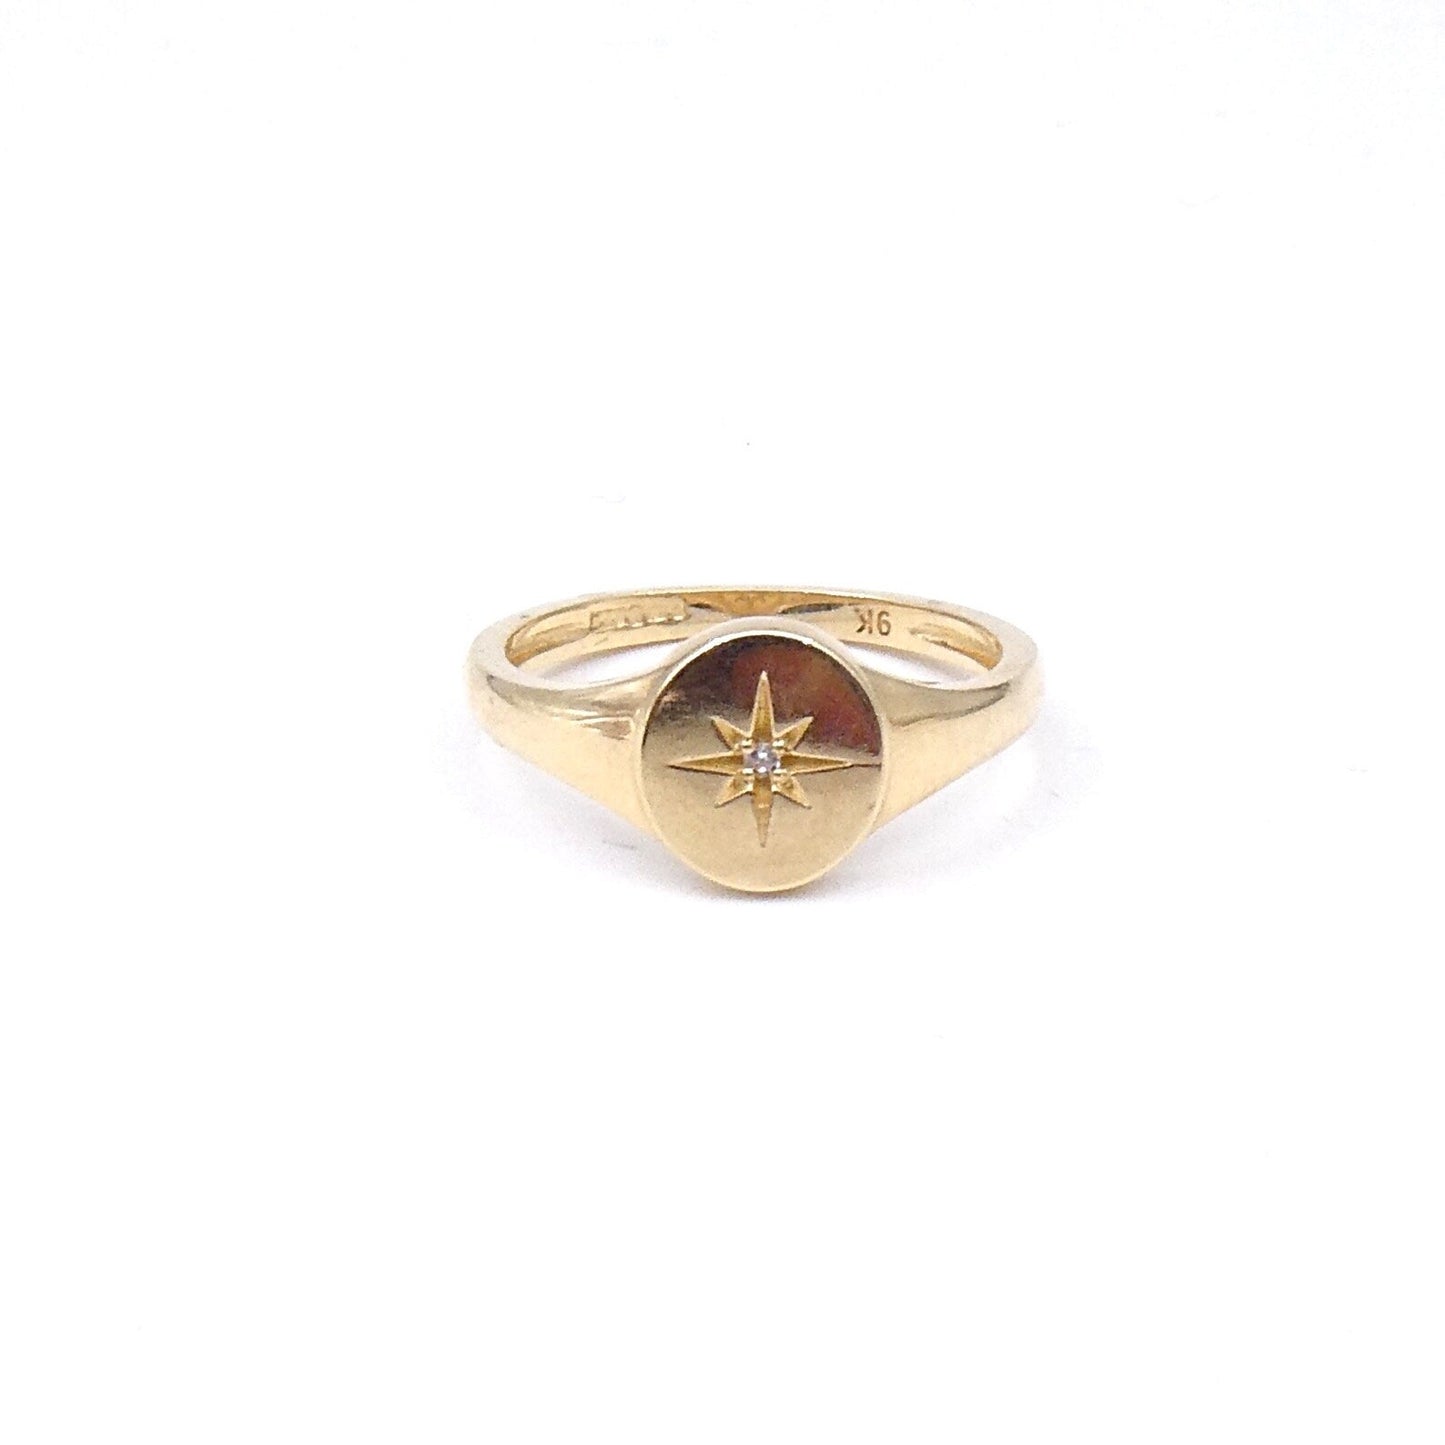 A signet ring engraved with a star, set with a crystal, 9kt gold oval signet ring. - Collected